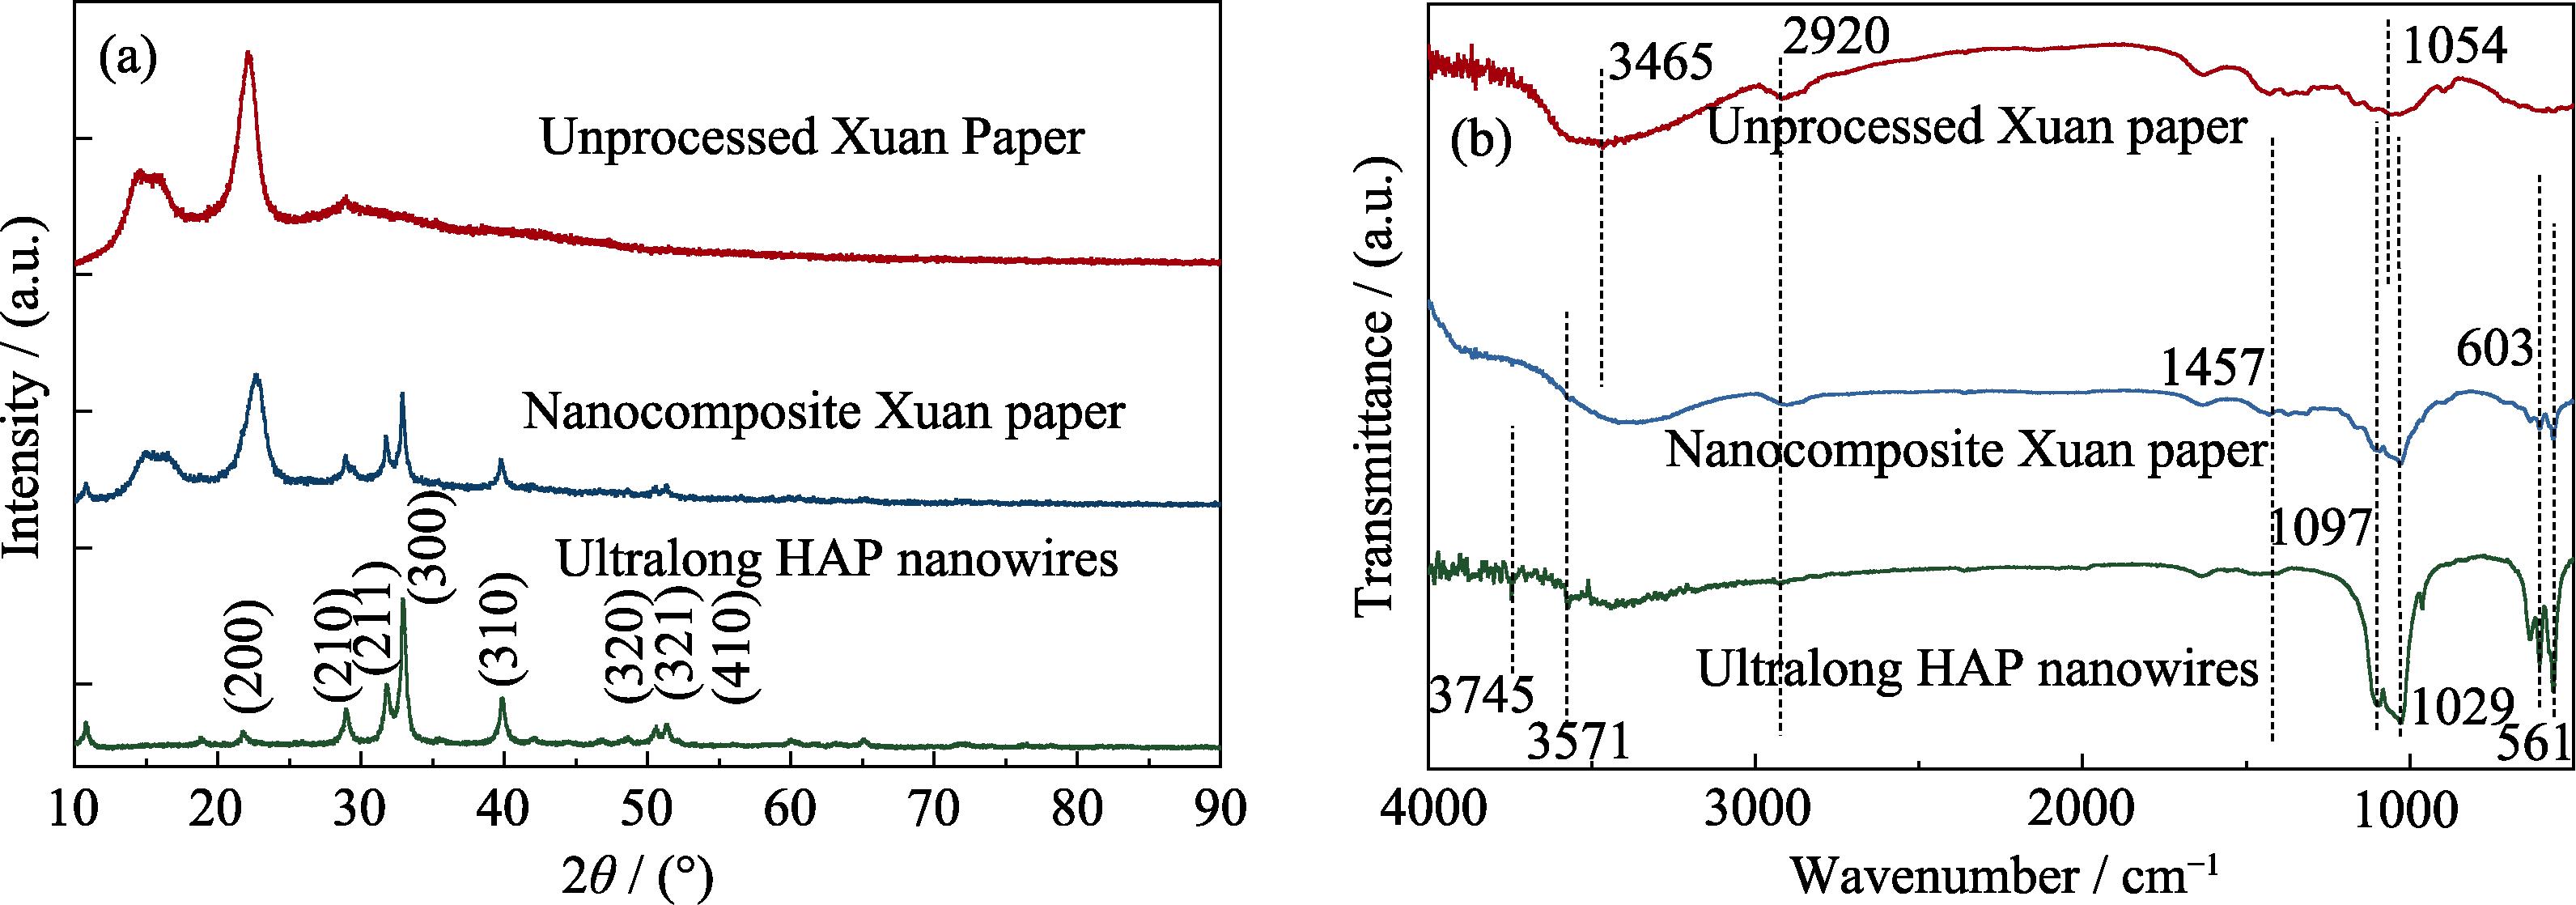 XRD patterns (a) and FT-IR spectra (b) of the commercial unprocessed Xuan paper, the as-prepared new type of nanocomposite “Xuan paper” with HAP weight ratio of 25%, and ultralong HAP nanowires